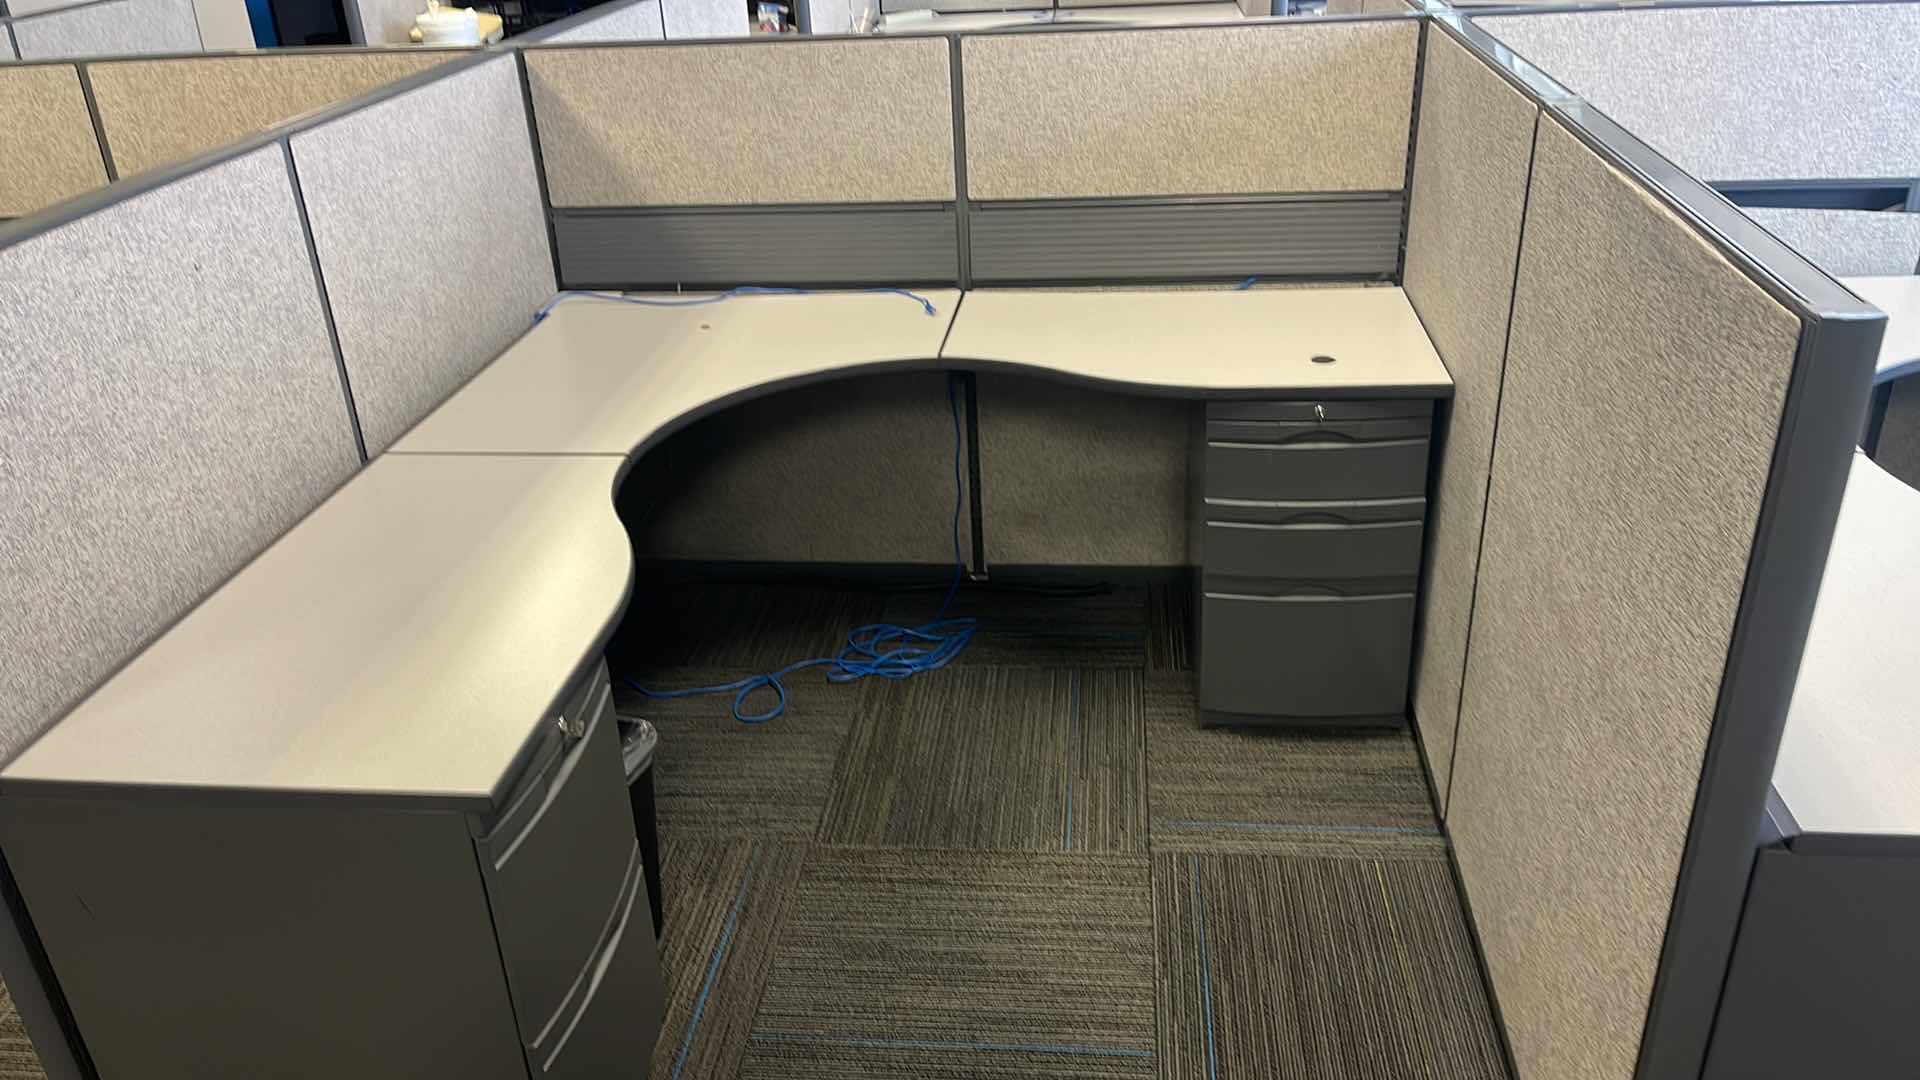 Photo 5 of 6 PC CUBICAL SET W 5 DRAWER MEDAL BASE DESKS 76” X 76” H50” (BUYER TO DISASSEMBLE & REMOVE FROM 2ND STORY OFFICE BUILDING W ELEVATOR)